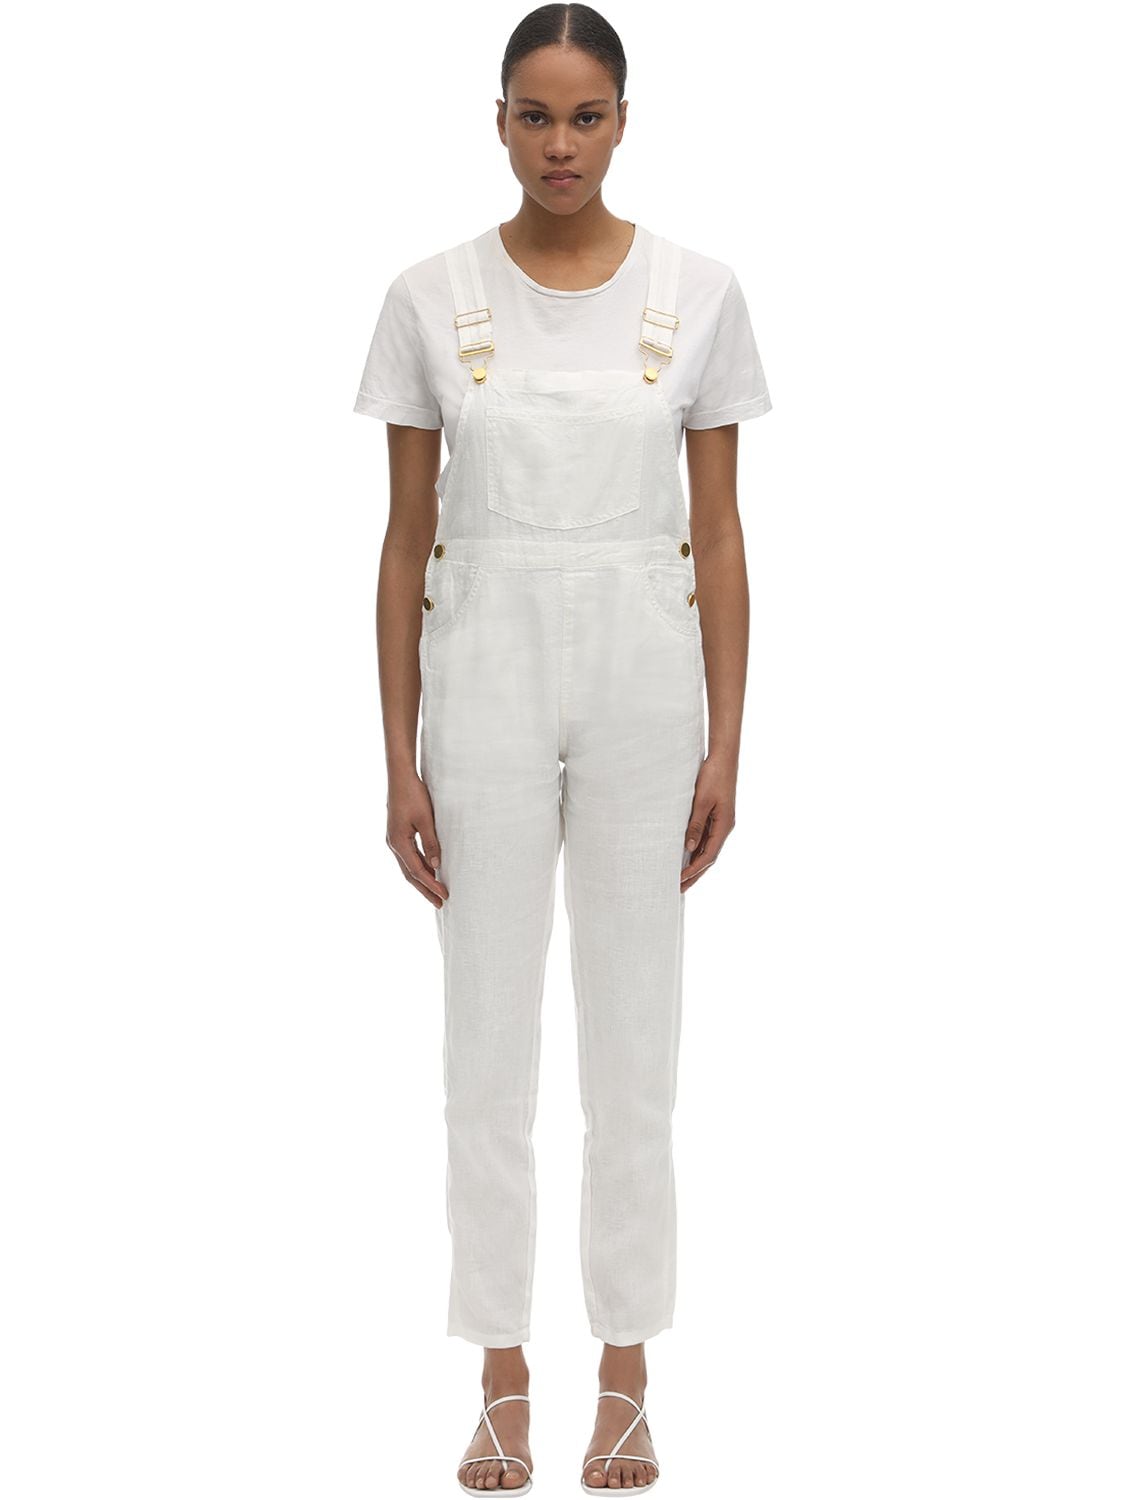 WEWOREWHAT BASIC LINEN OVERALLS,71ICEB003-MTAW0